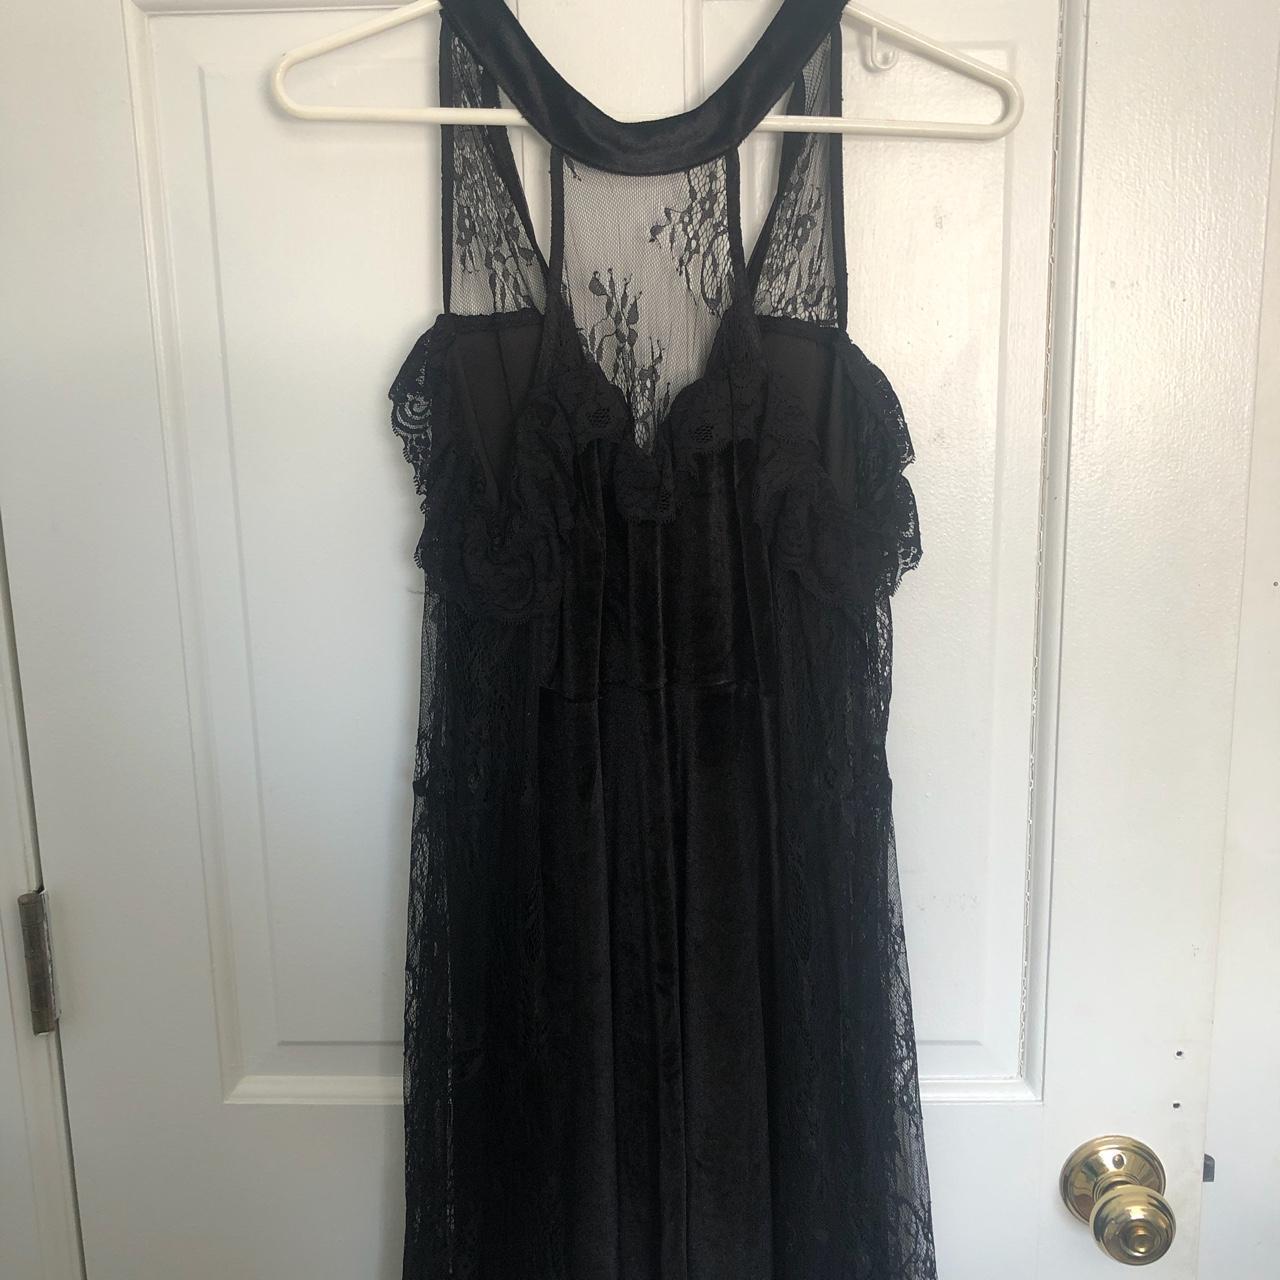 gothic velvet dress with lace sleeves from ROMWE,... - Depop